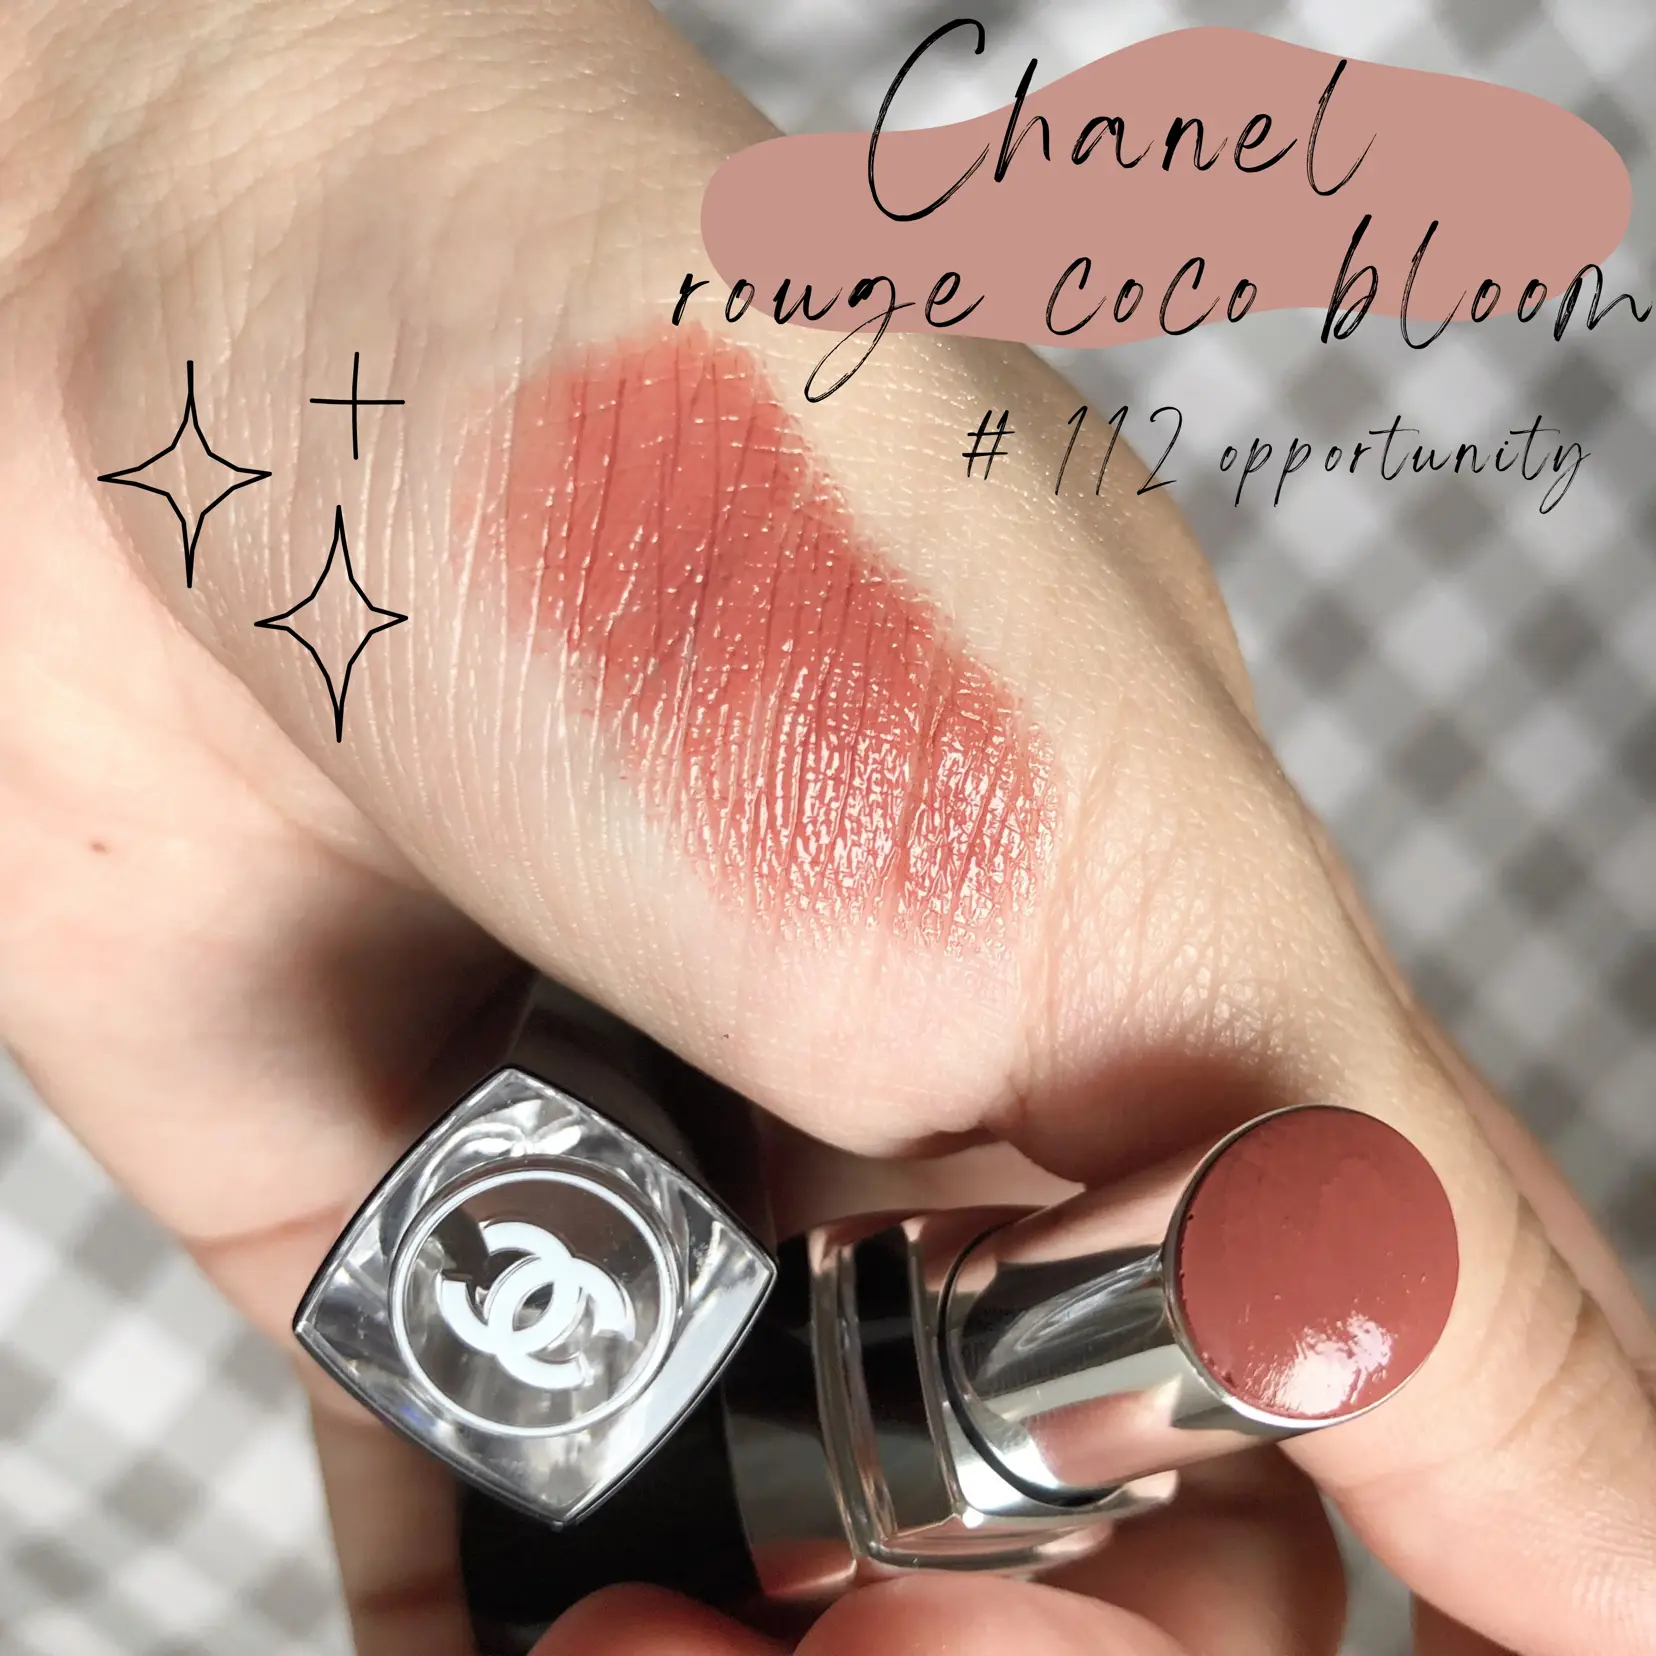 Chanel rouge coco bloom สี 112 opportunity ✨